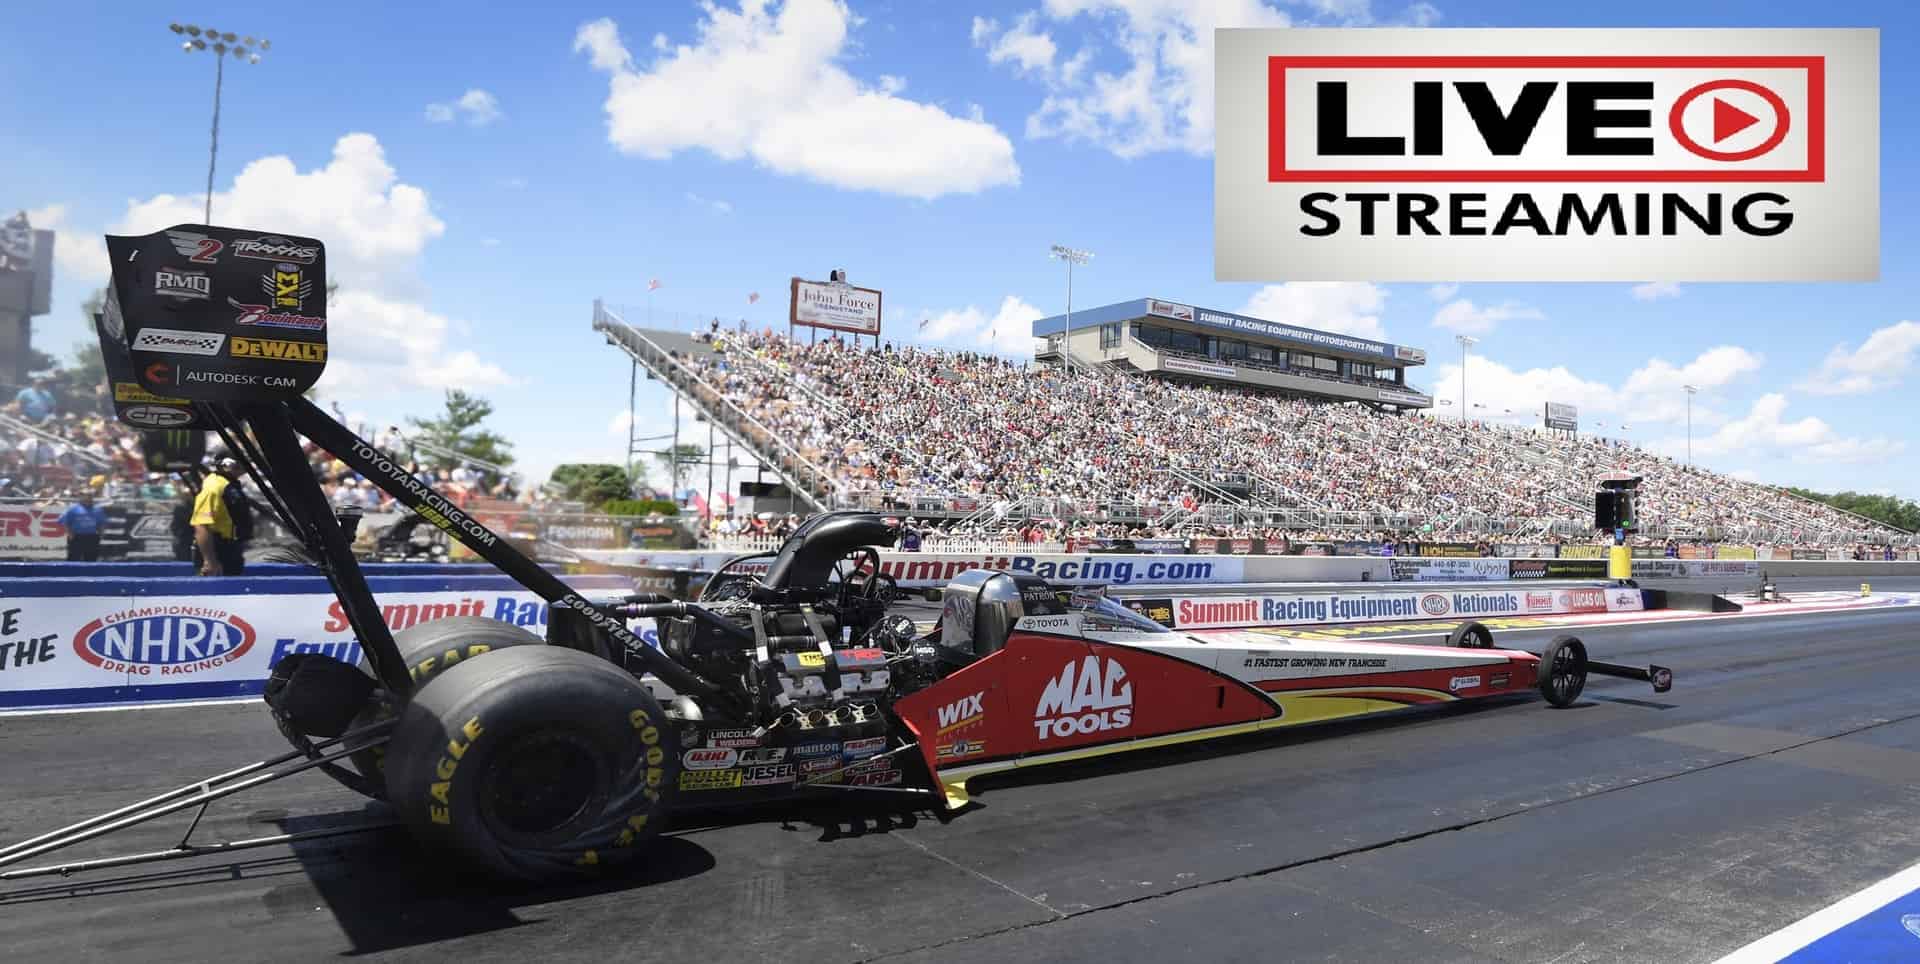 2021-nhra-camping-world-drag-racing-series-schedule-live-stream